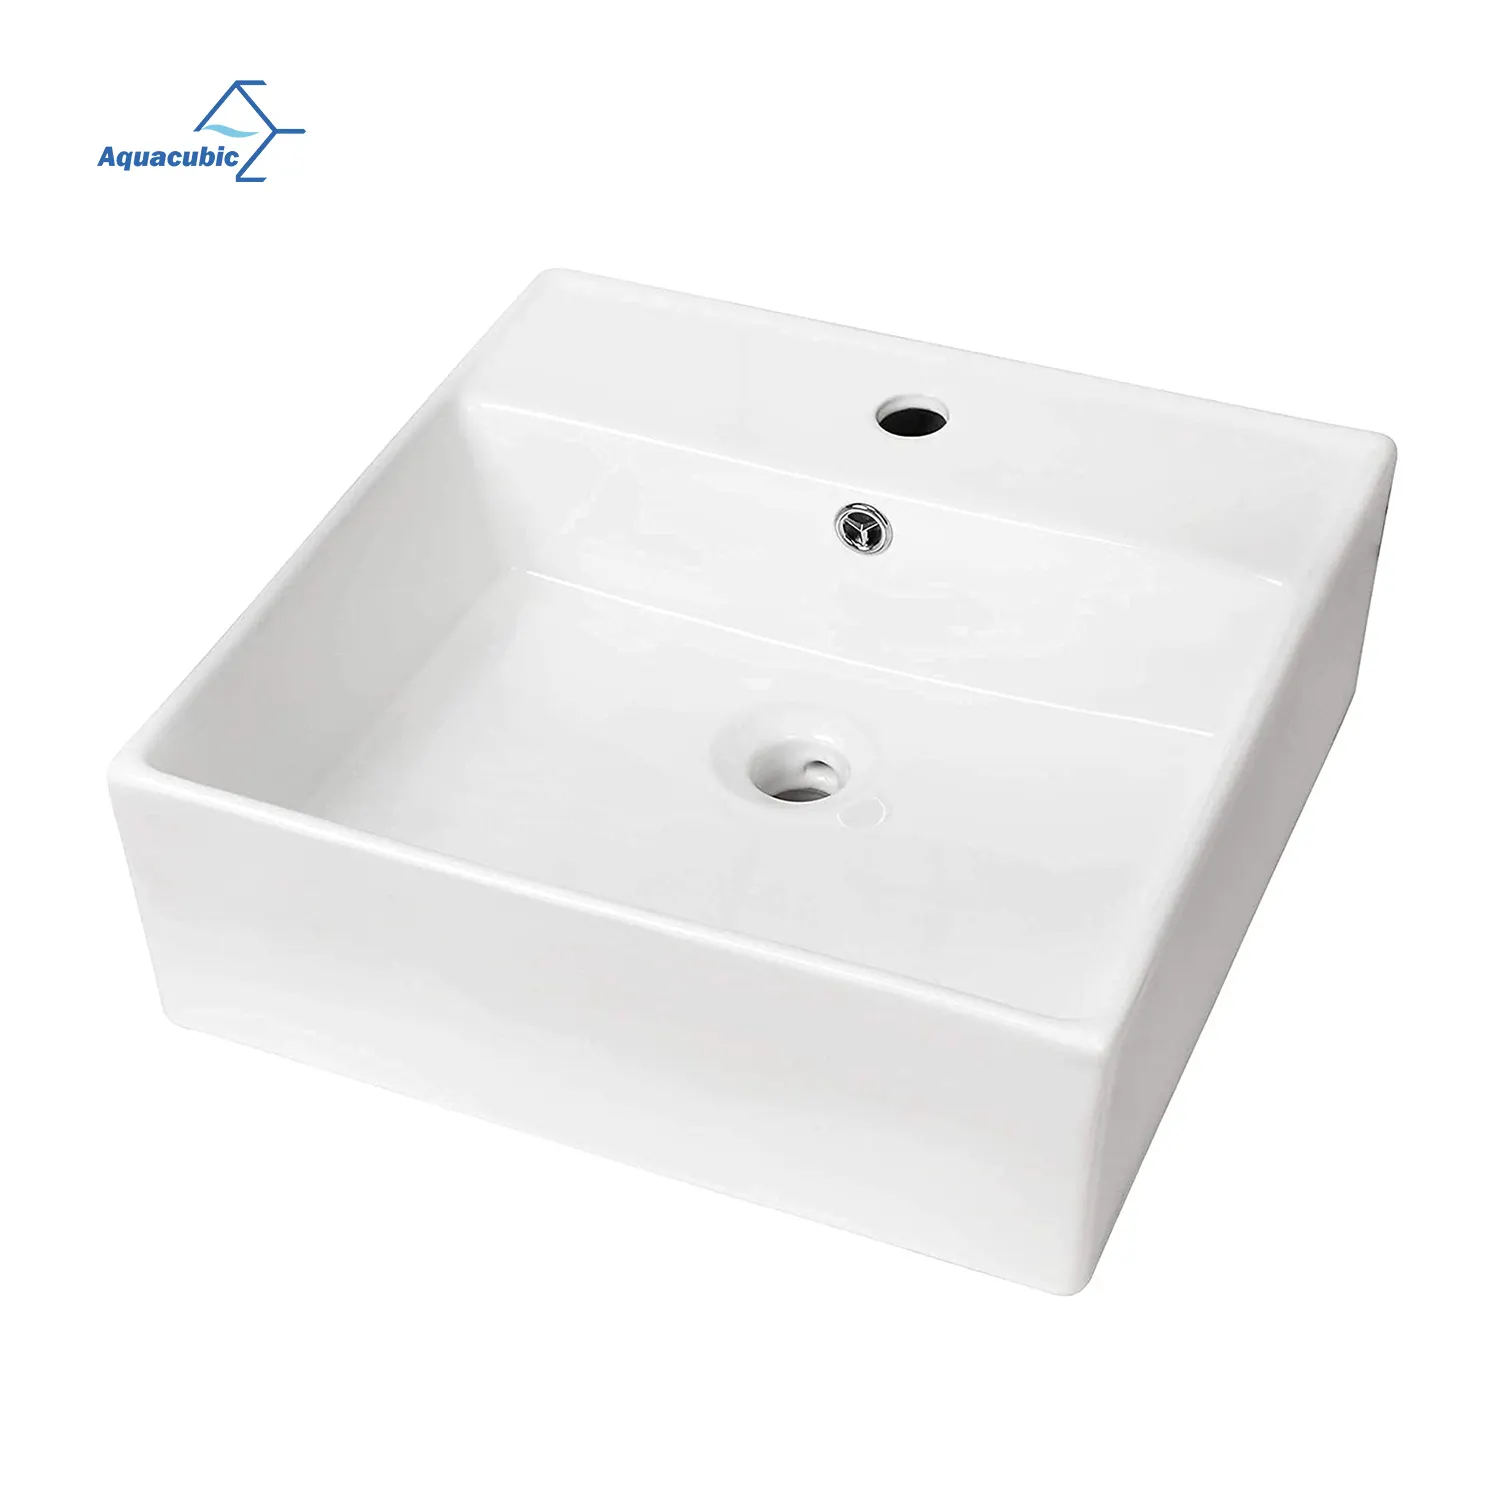 Modern Square Hand Wash Basin Ceramic Rectangular Countertop Bathroom Sink Without Faucet